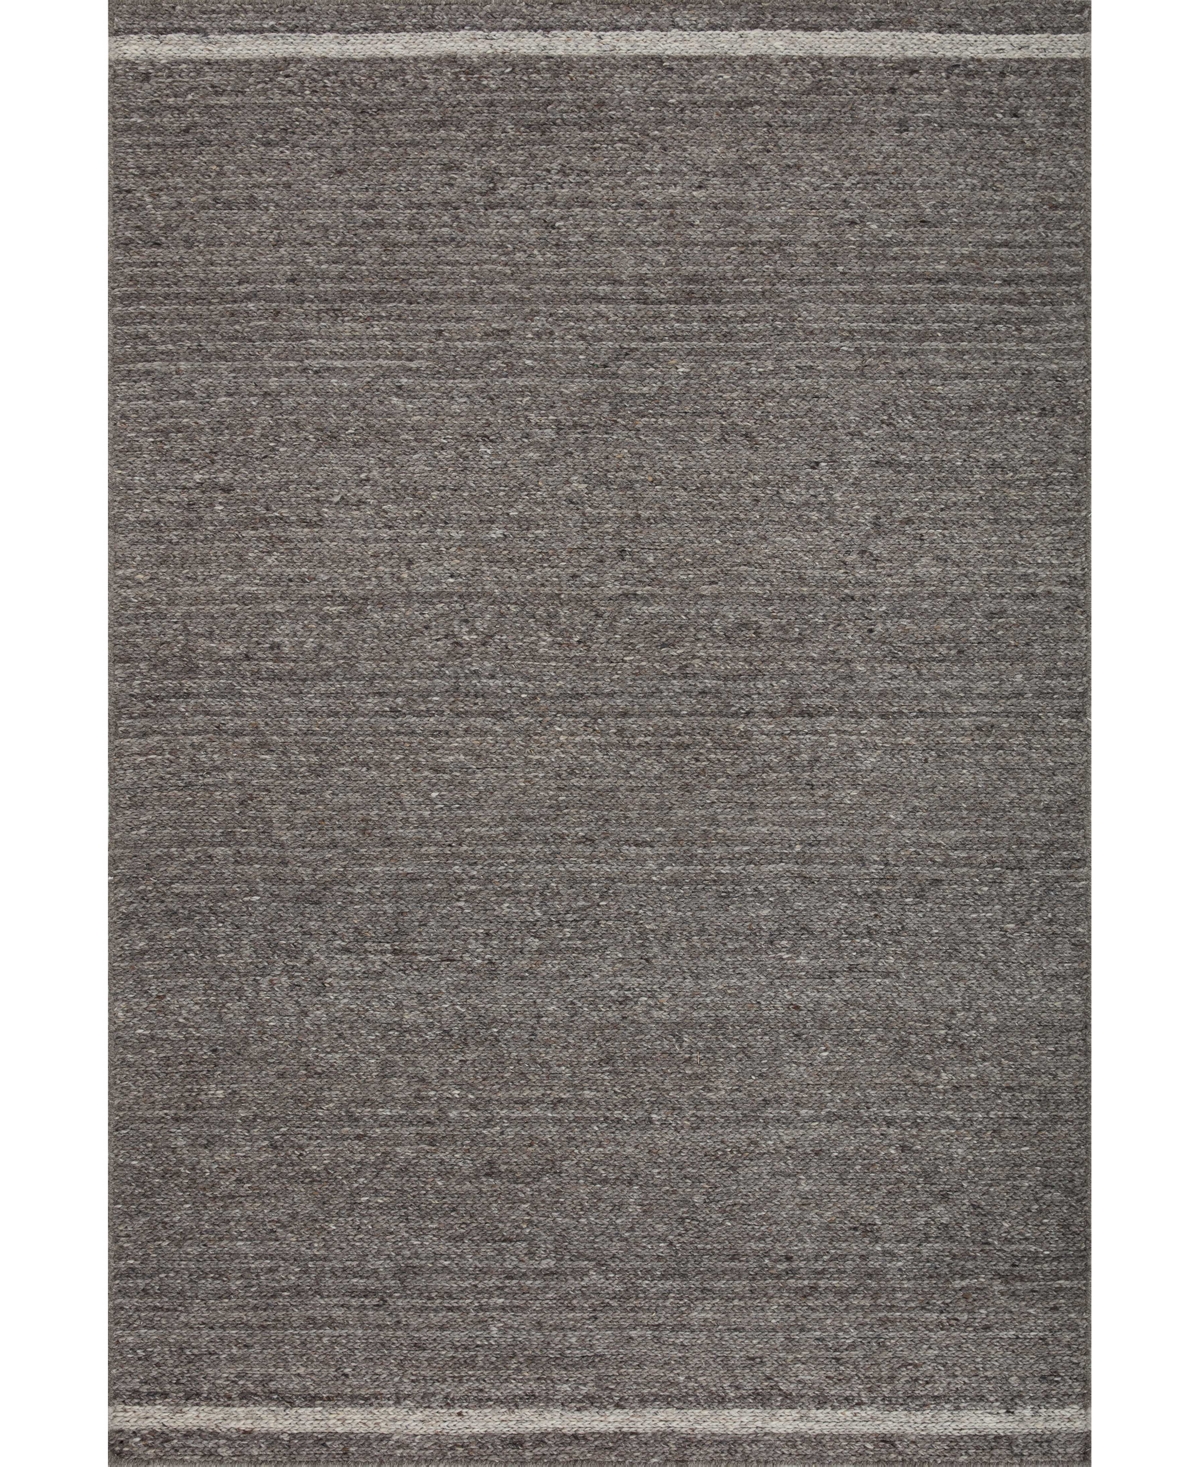 Magnolia Home By Joanna Gaines X Loloi Ashby Ash-02 3'6" X 5'6" Area Rug In Charcoal